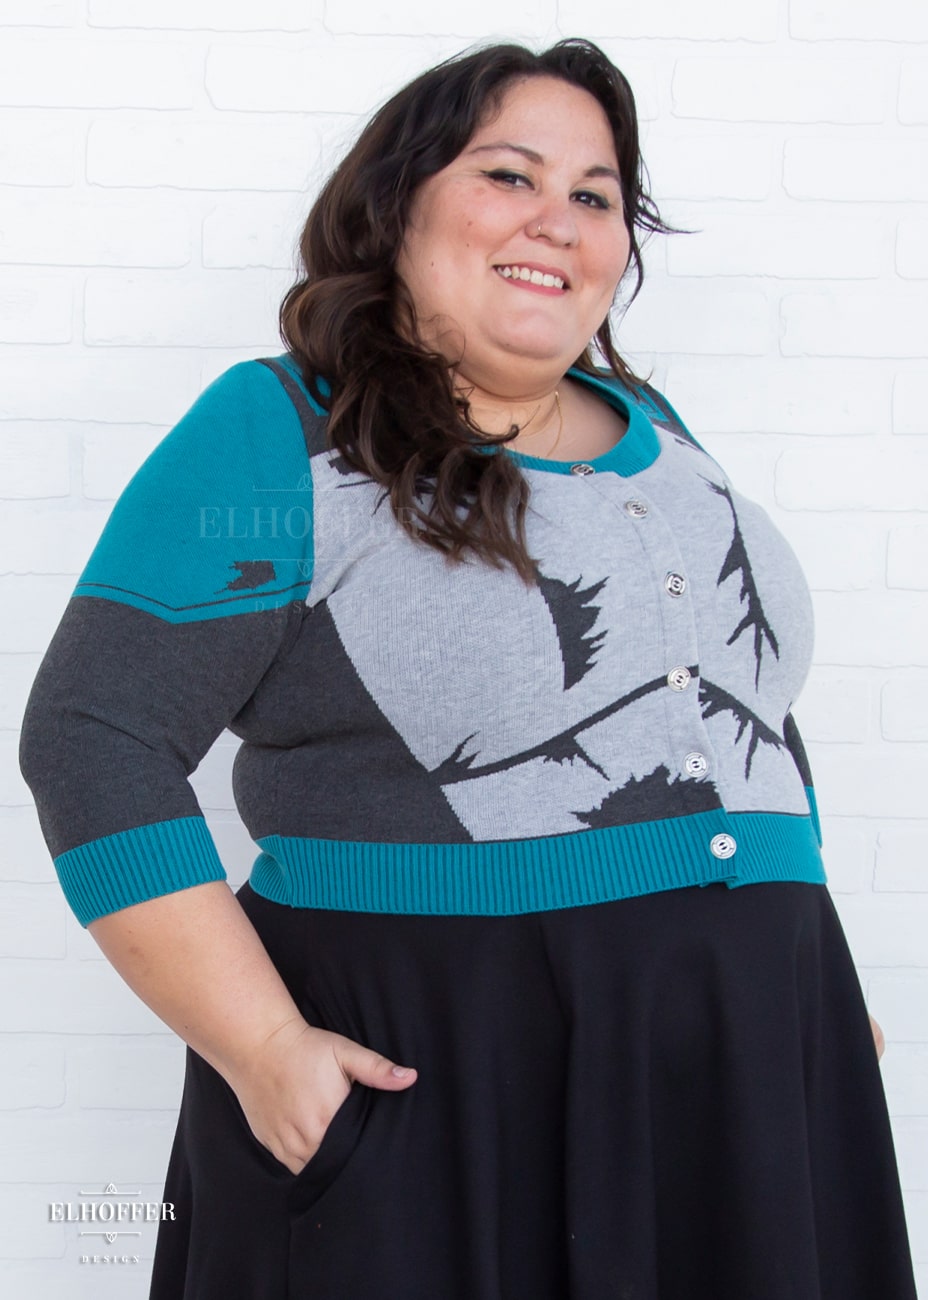 Alysia, a sun kissed skin 2xl model with long wavy dark brown hair, is smiling while wearing a cropped button up knit cardigan with 3/4 sleeves. The cardigan front is mainly a light grey with dark grey decorative lines that give the impression of battle damaged armor, with teal at the shoulders, and the bottom half of the sleeve and back of the cardigan are a dark grey. The neckine, bottom, and cuffs are all teal ribbing.